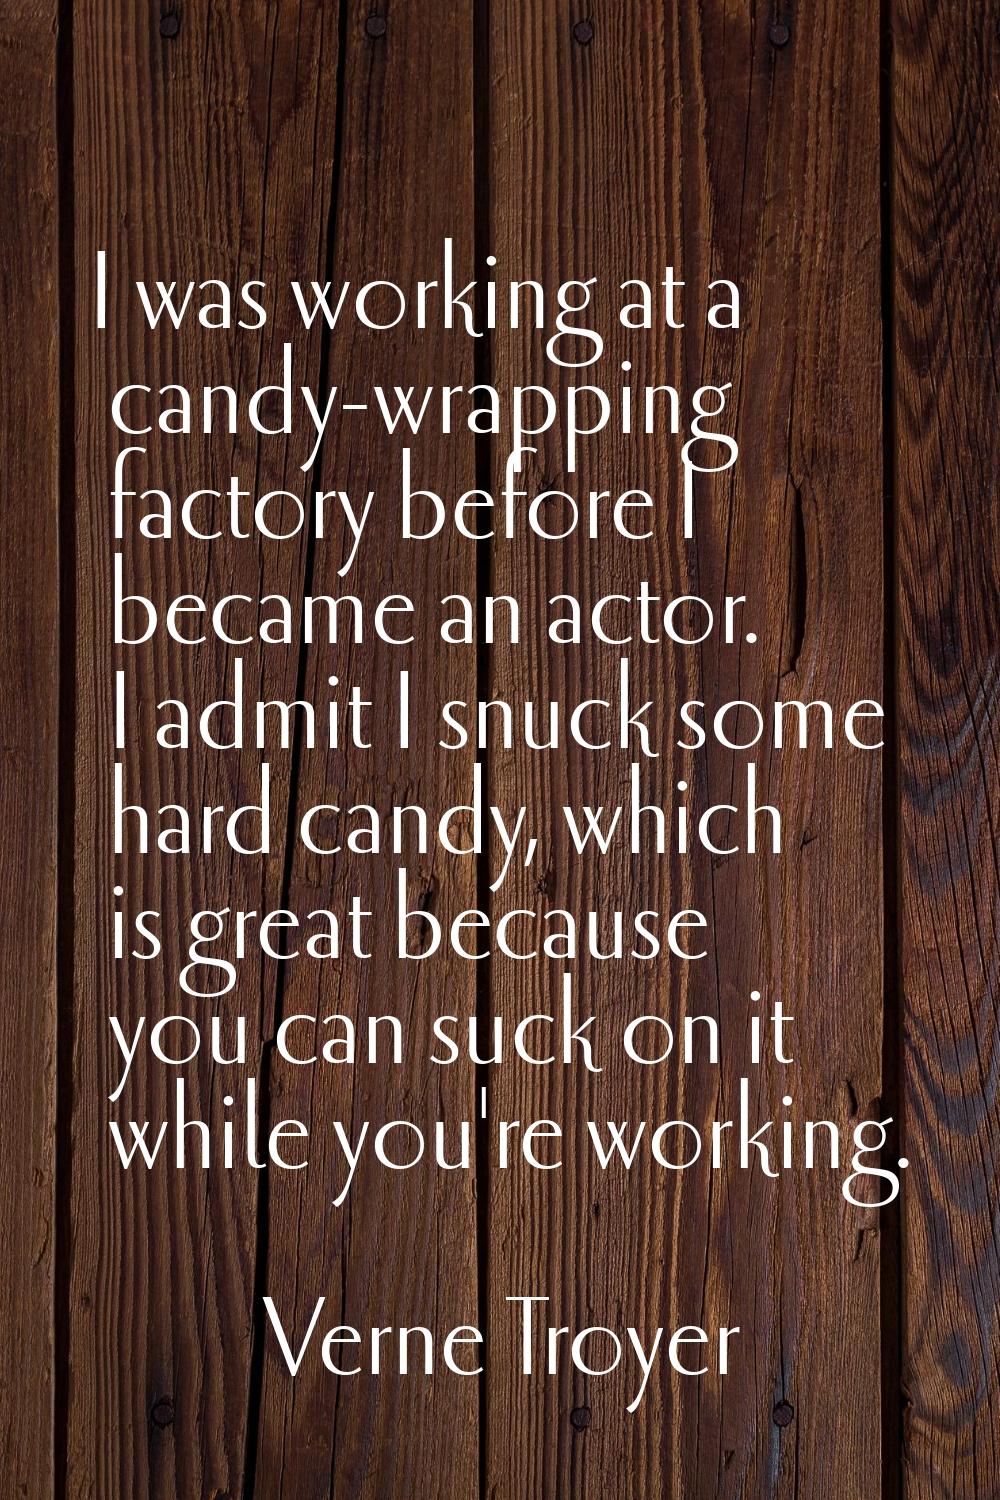 I was working at a candy-wrapping factory before I became an actor. I admit I snuck some hard candy